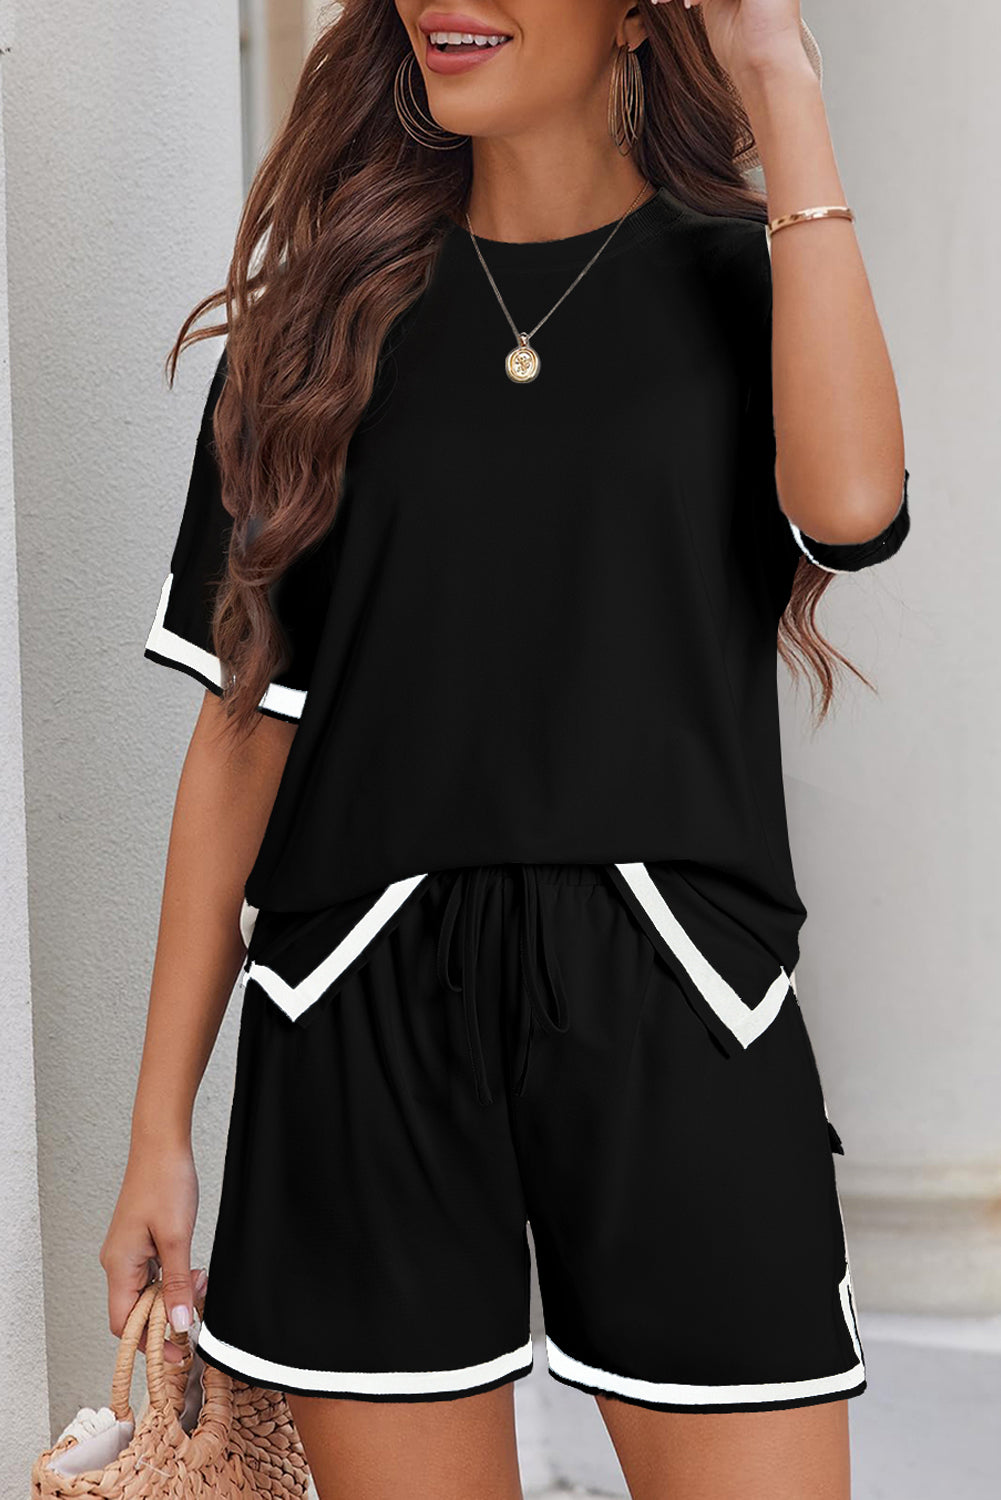 Black Contrast Trim Tee and Shorts Set - Stylish and Comfortable Loungewear Outfit